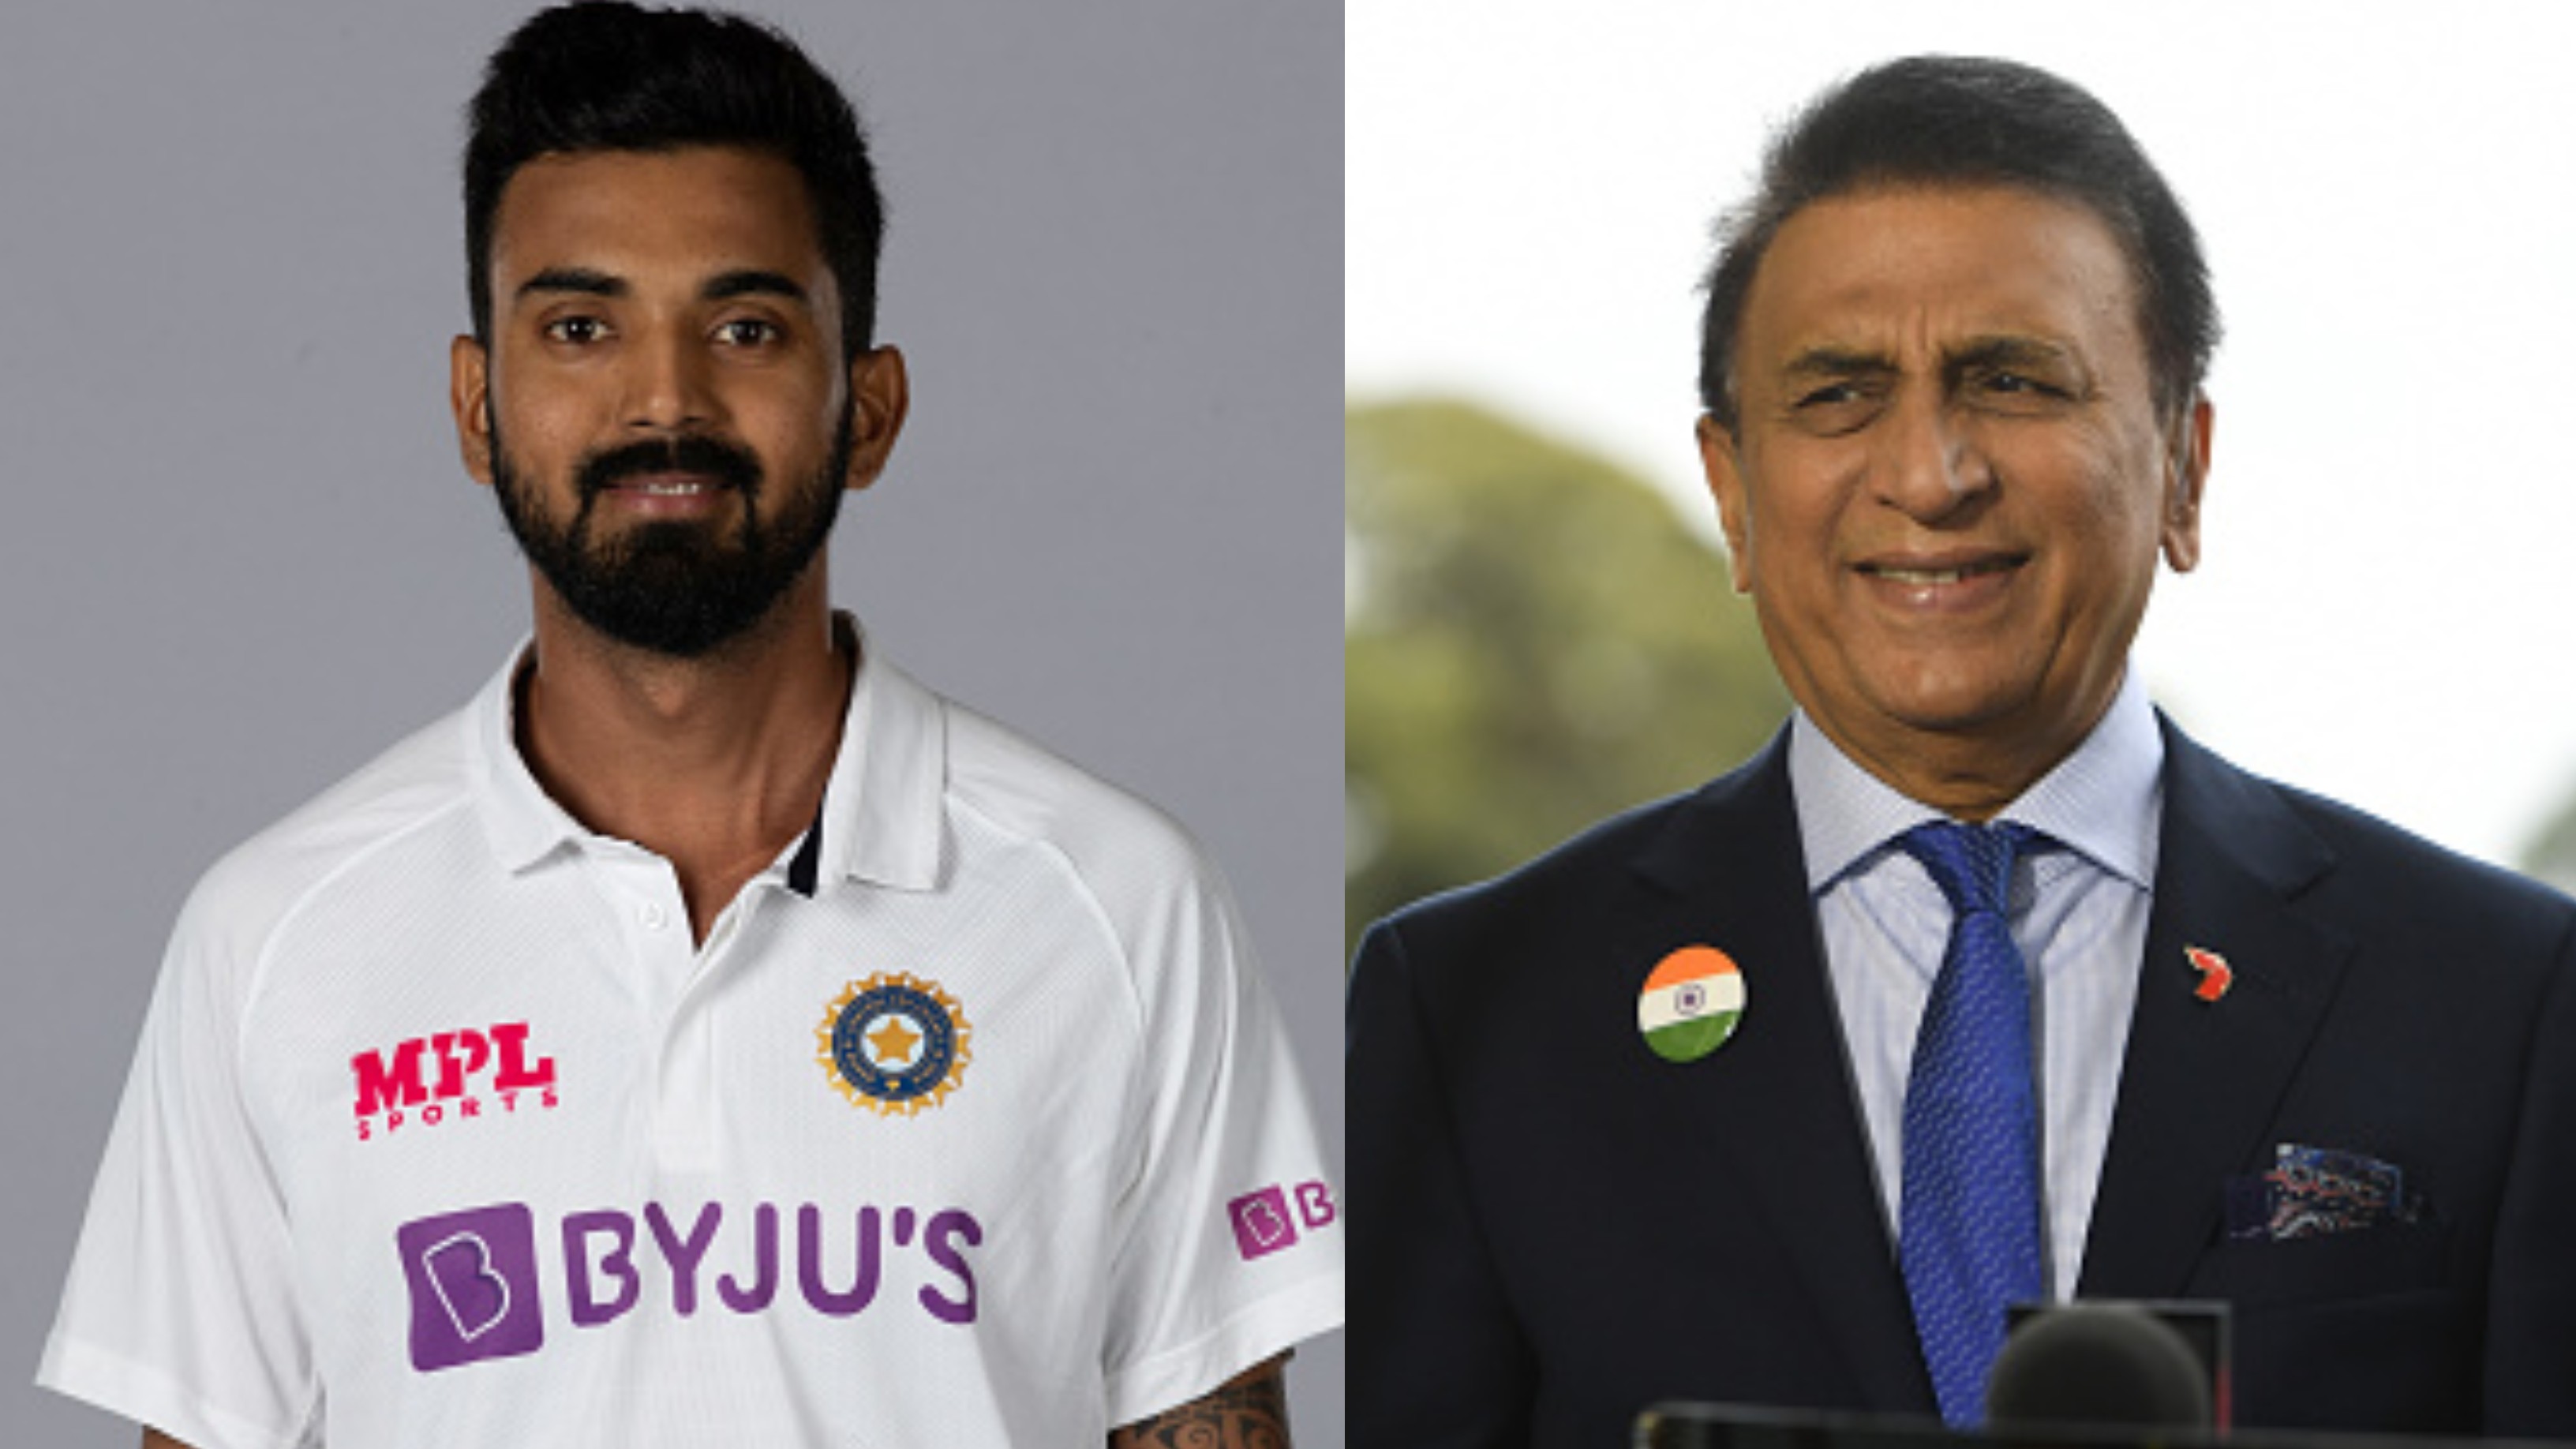 AUS v IND 2020-21: Sunil Gavaskar wants KL Rahul as opener in India playing XI for the MCG Test